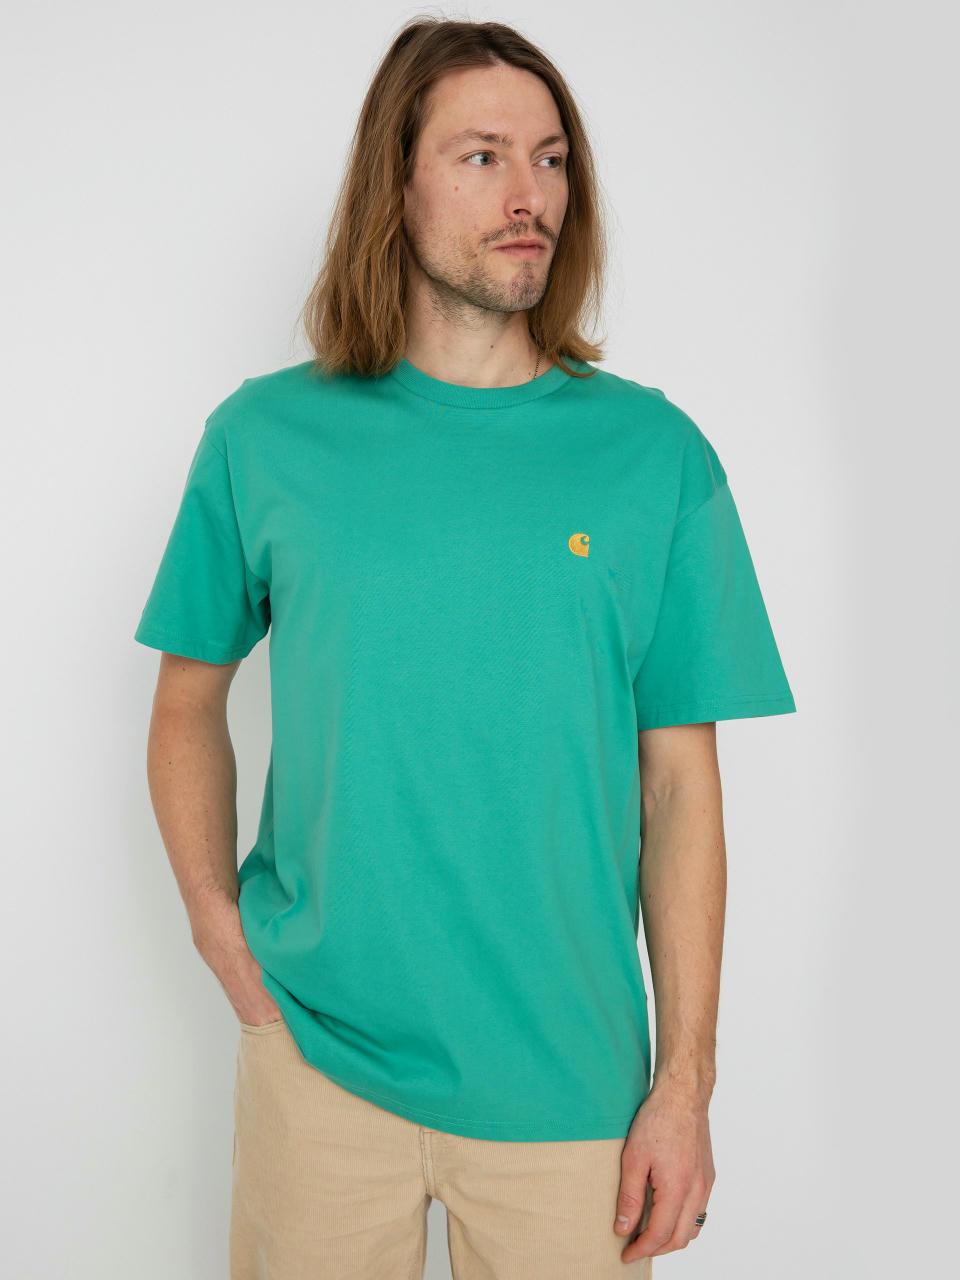 Carhartt WIP Chase T-shirt (citron/gold)